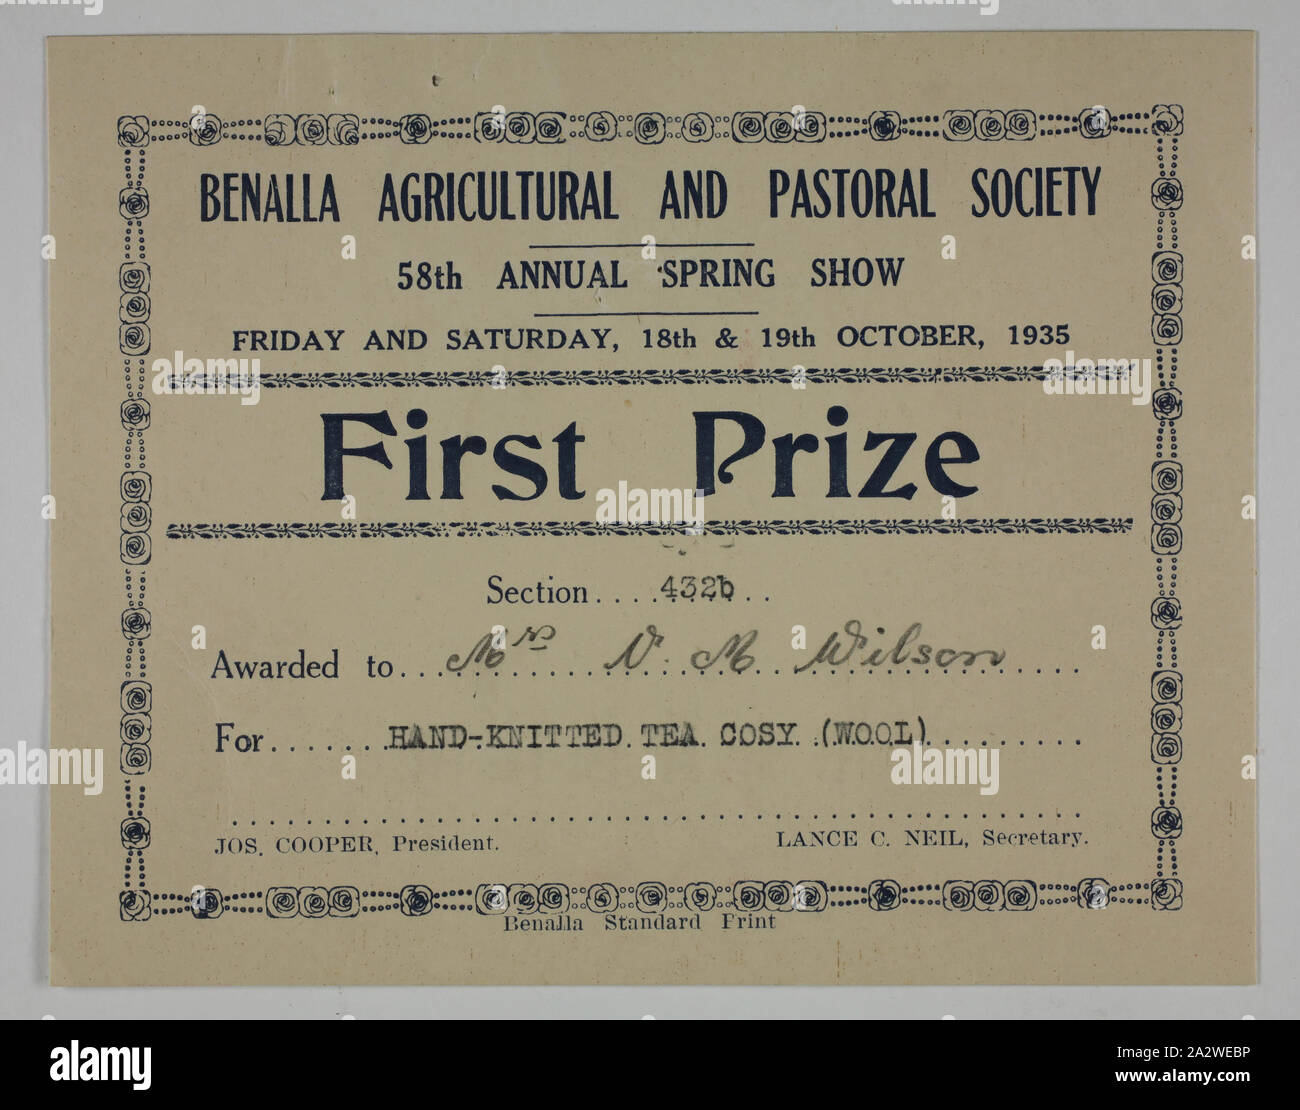 Certificate - First Prize, Benalla Agricultural & Pastoral Society, 1935, Certificate awarded by to Mrs Violet May Wilson for her hand-knitted, woollen tea cosy at the Benalla Agricultural and Pastoral Society 58th Annual Spring Show, 18th - 19th October 1935 Stock Photo